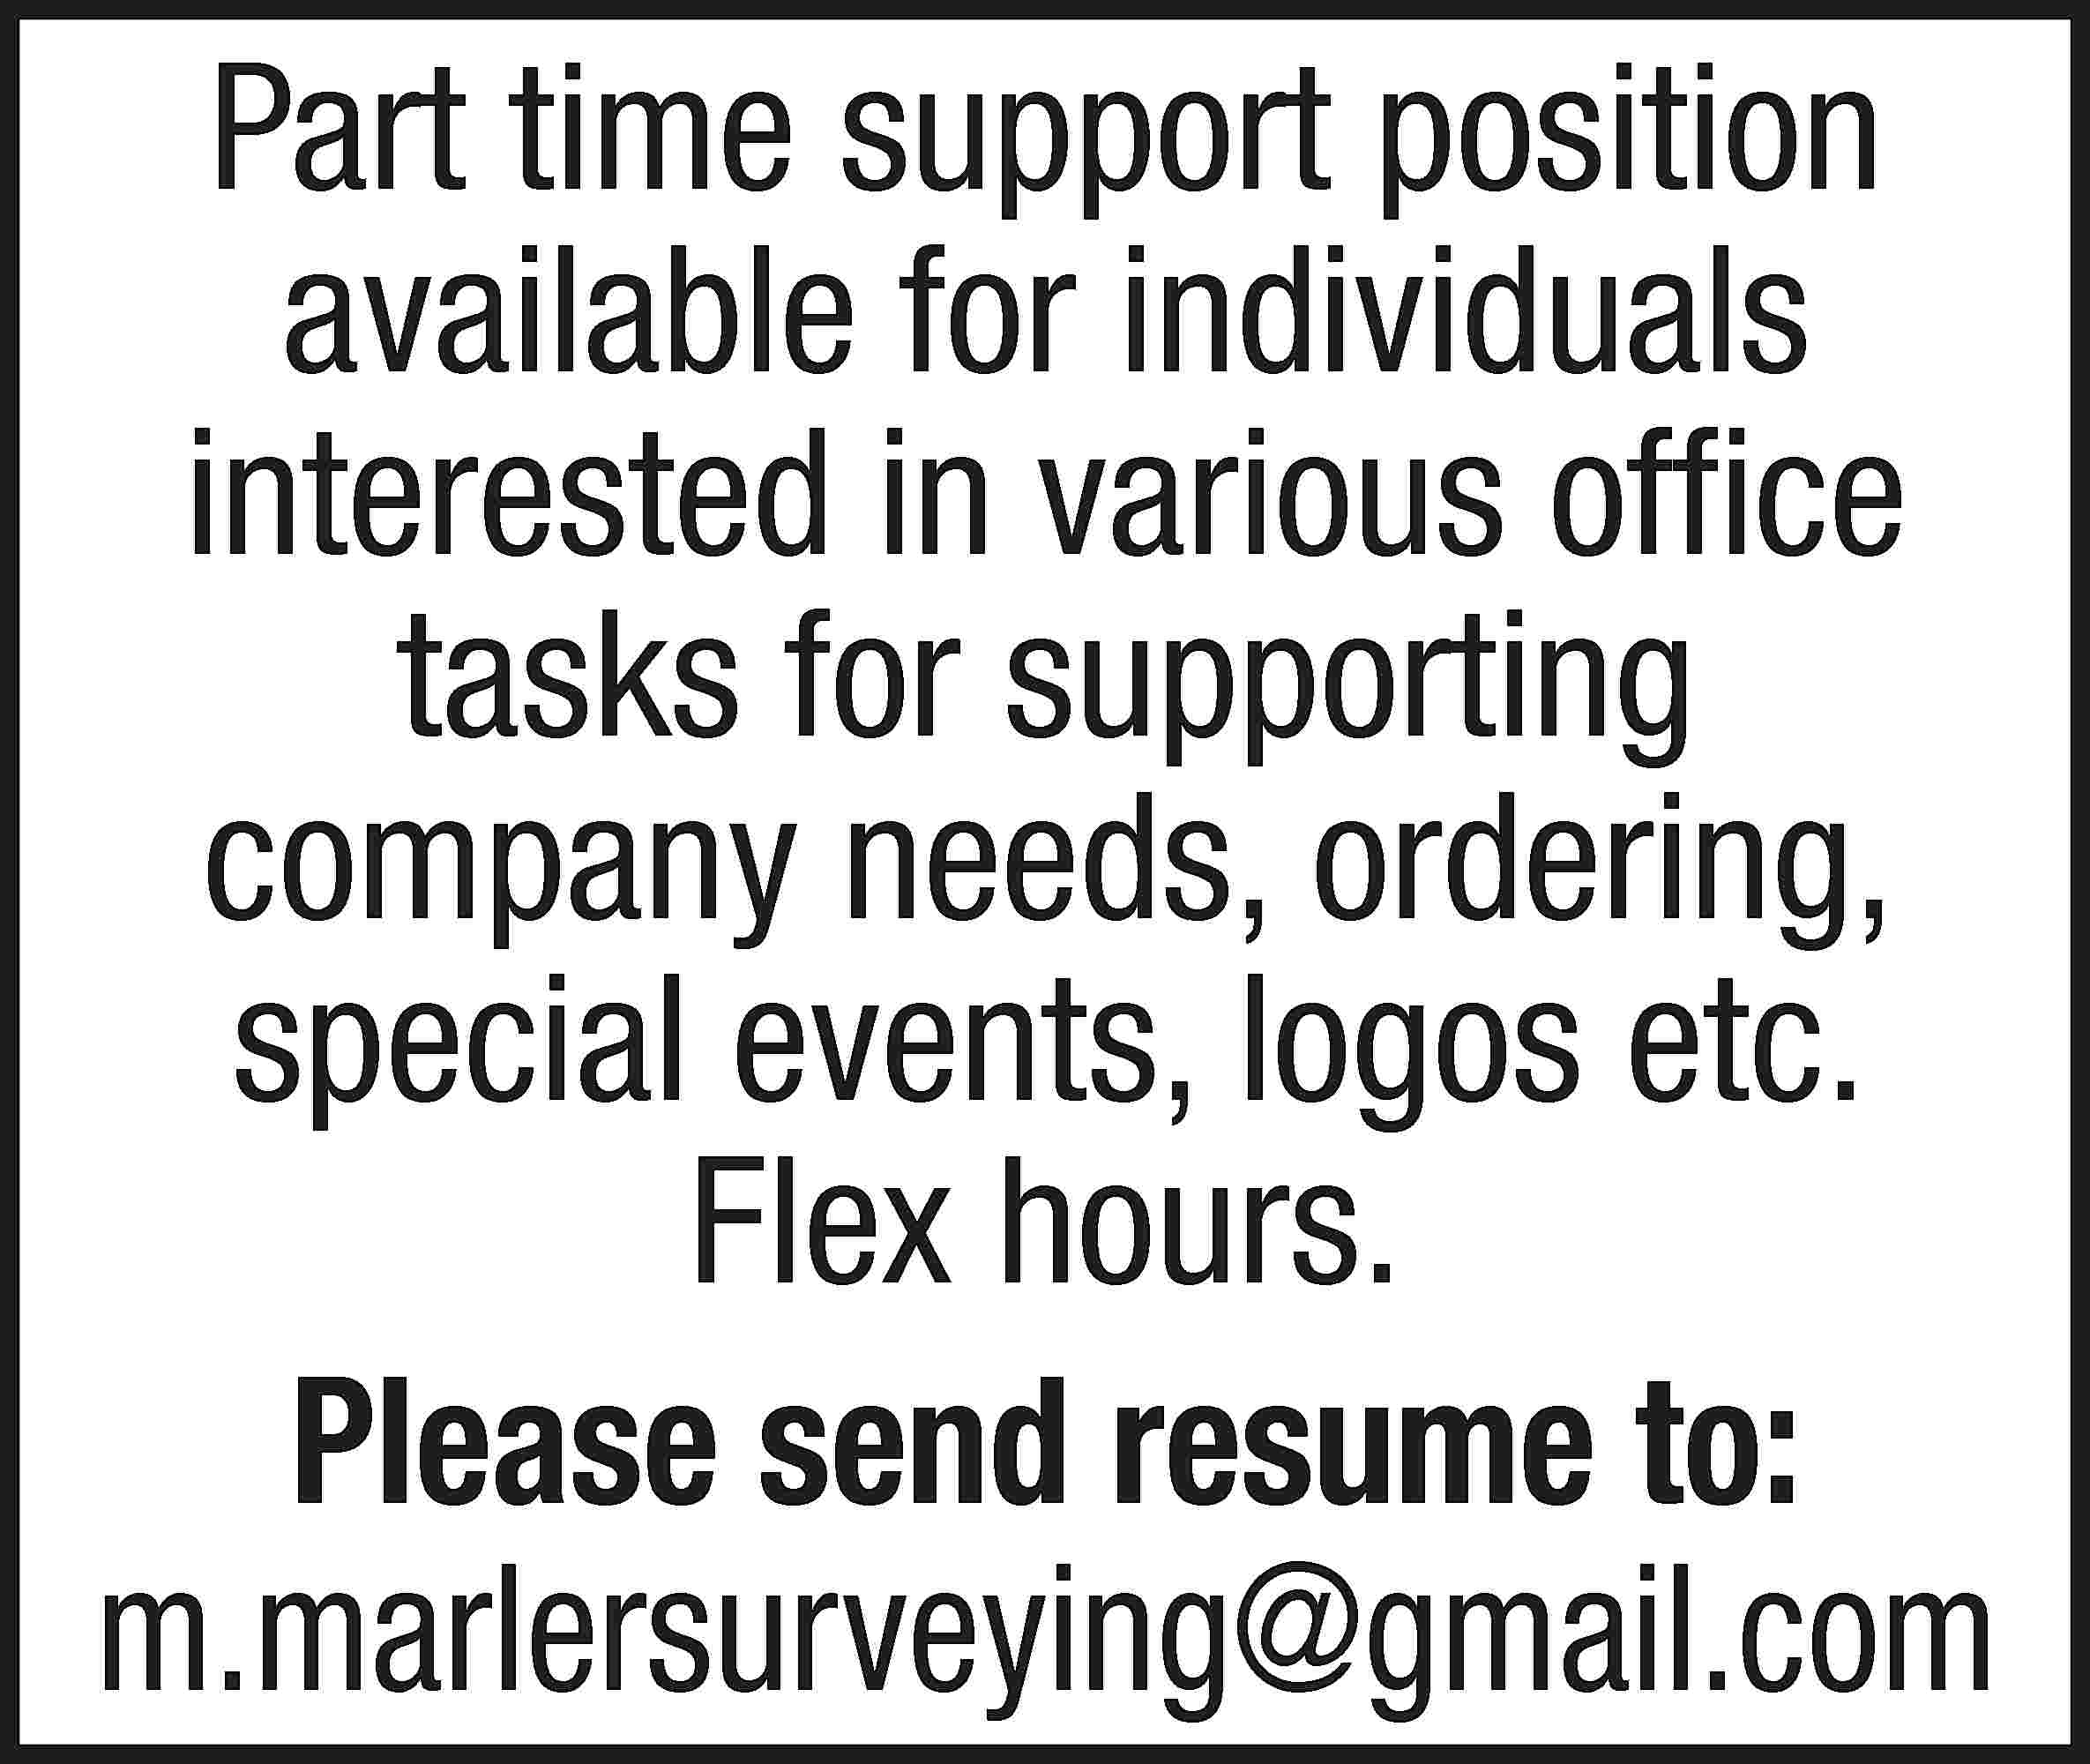 Part time support position available  Part time support position available for individuals interested in various office tasks for supporting company needs, ordering, special events, logos etc. Flex hours. Please send resume to: m.marlersurveying@gmail.com